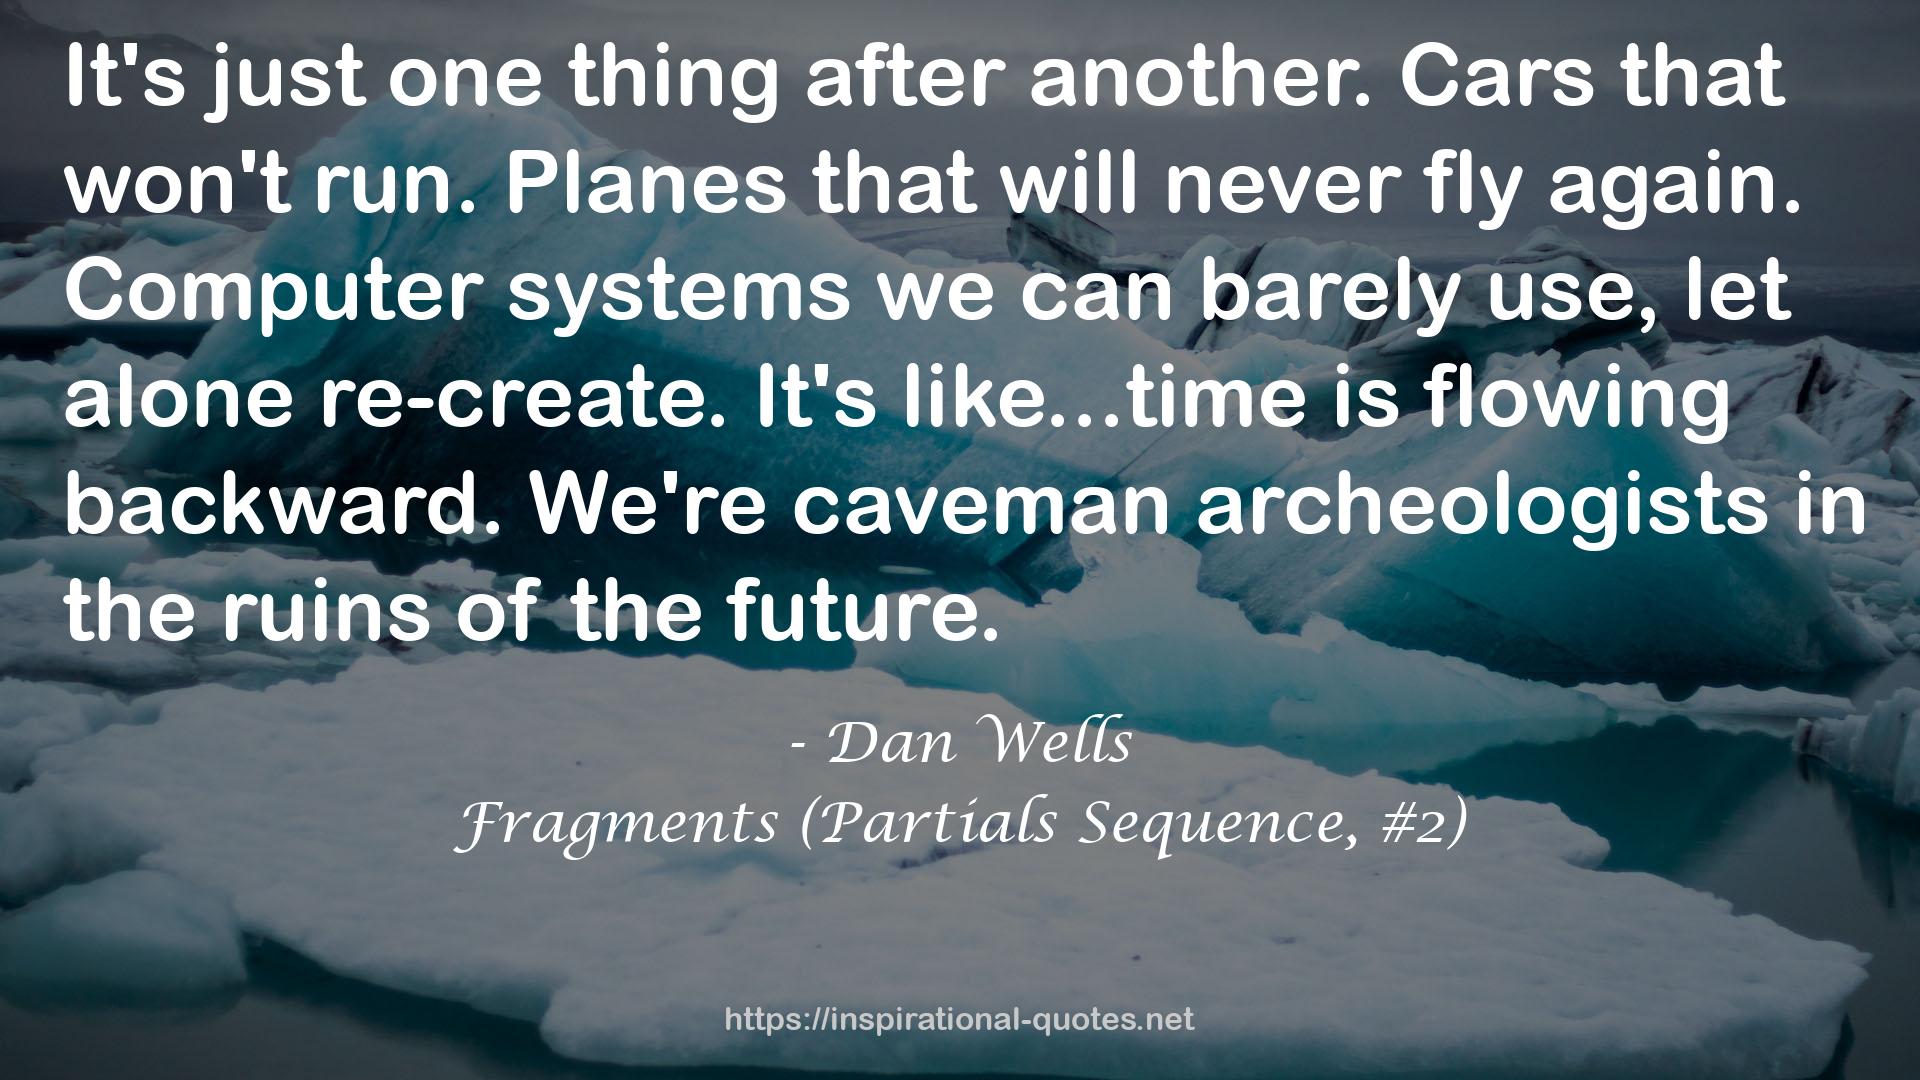 Fragments (Partials Sequence, #2) QUOTES